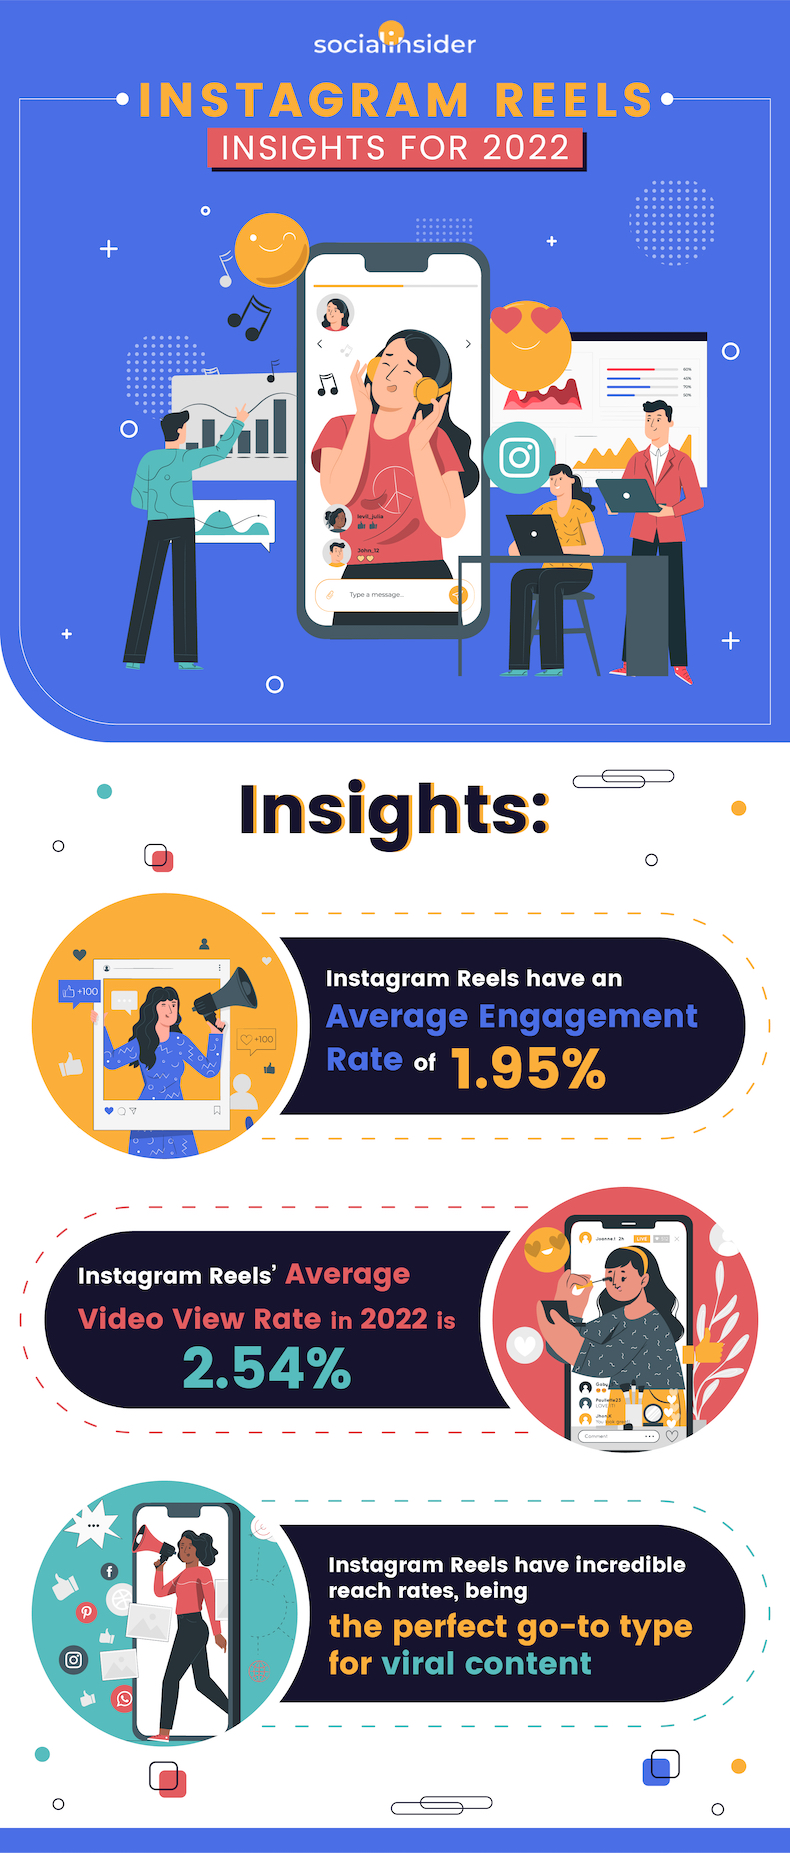 Instagram Reels insights for 2022 infographic